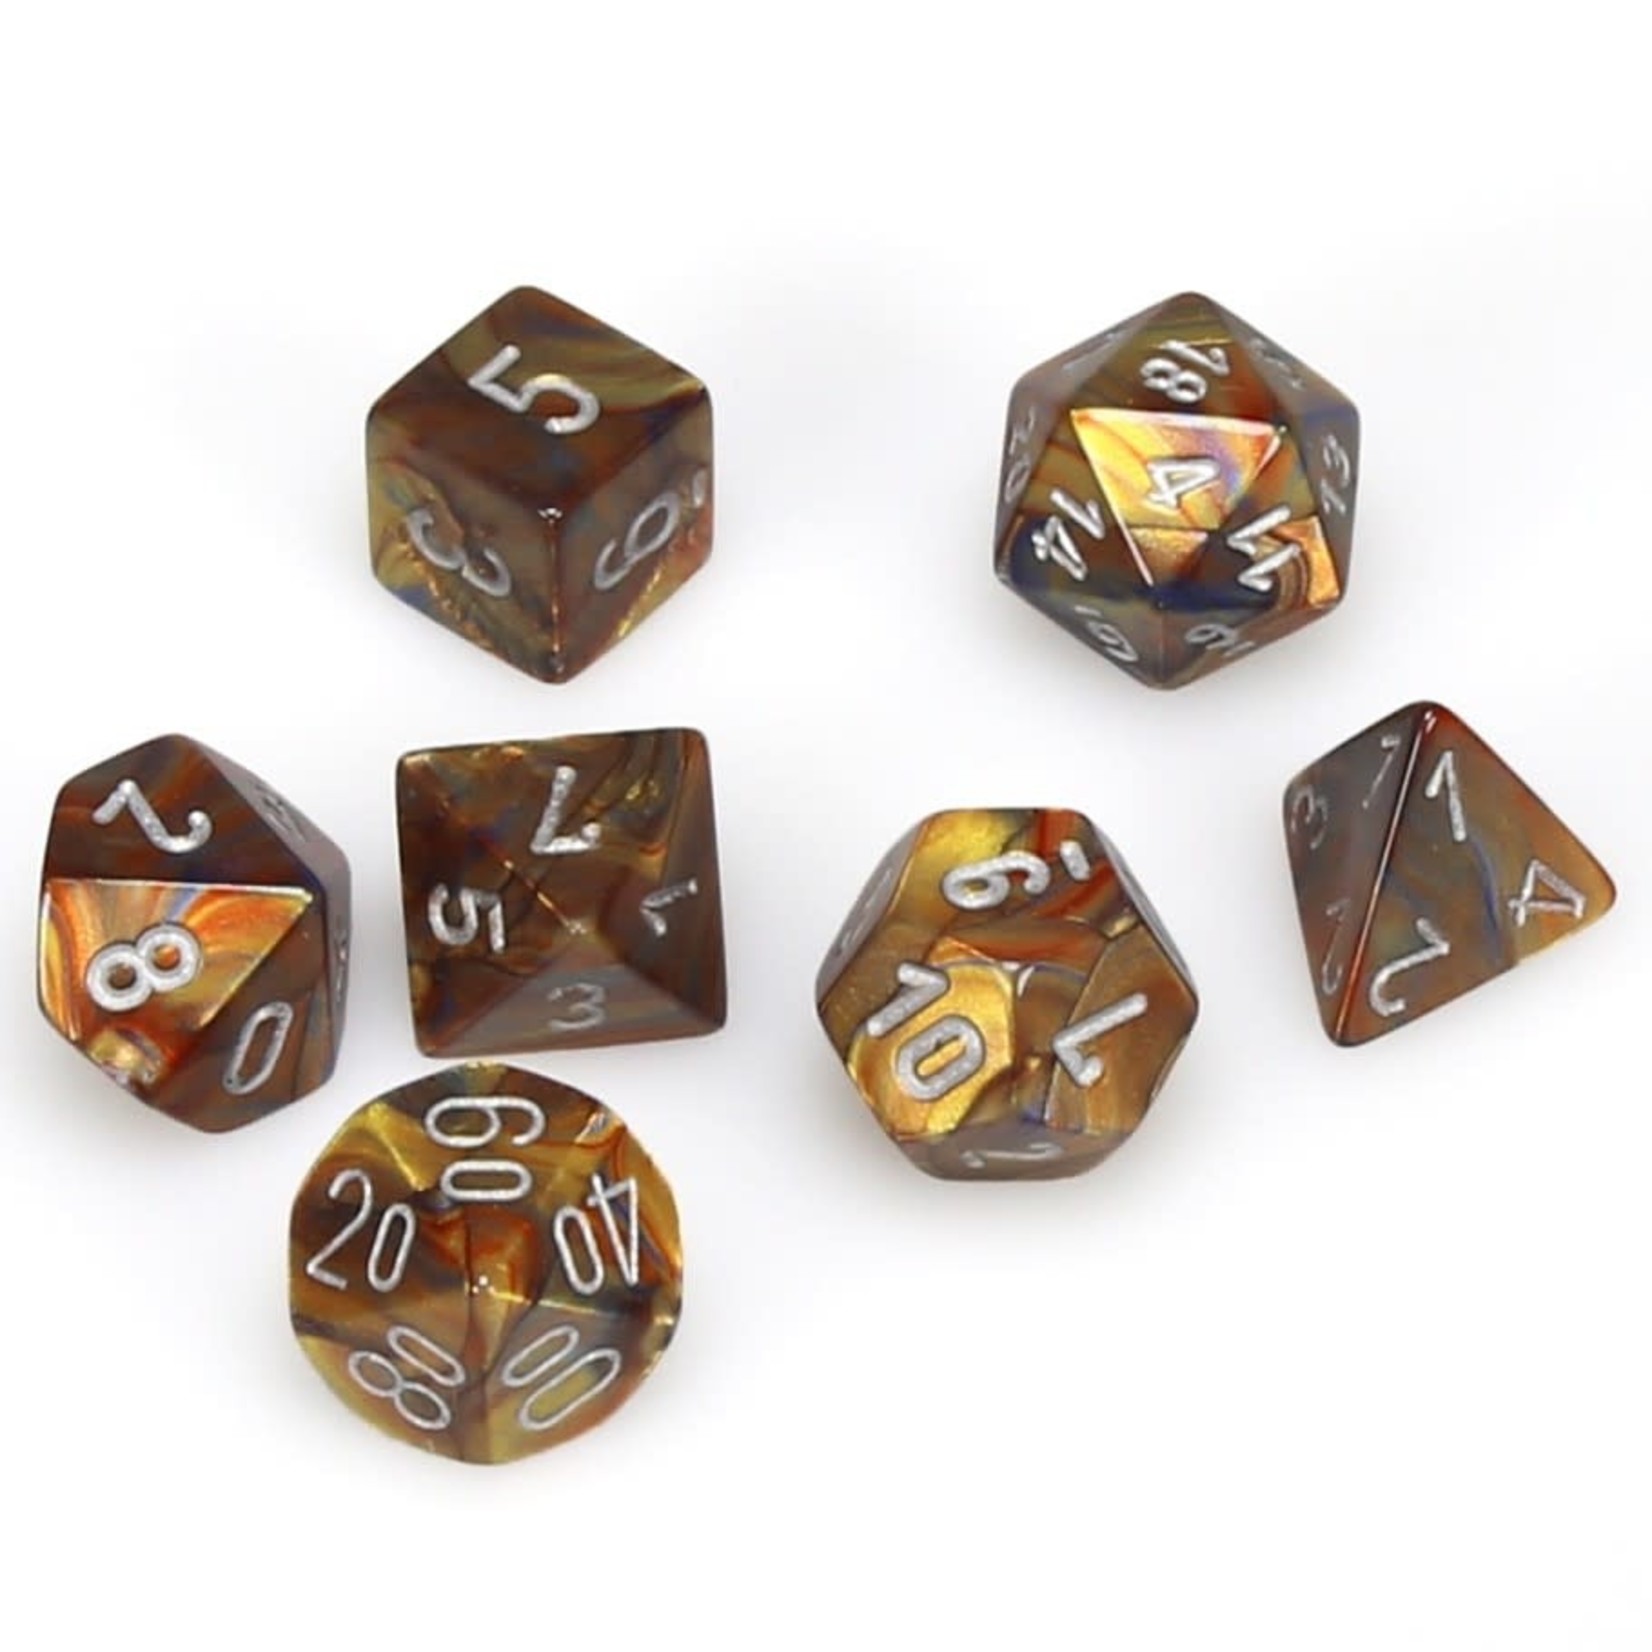 Chessex Chessex Lustrous Gold with Silver Polyhedral 7 die set